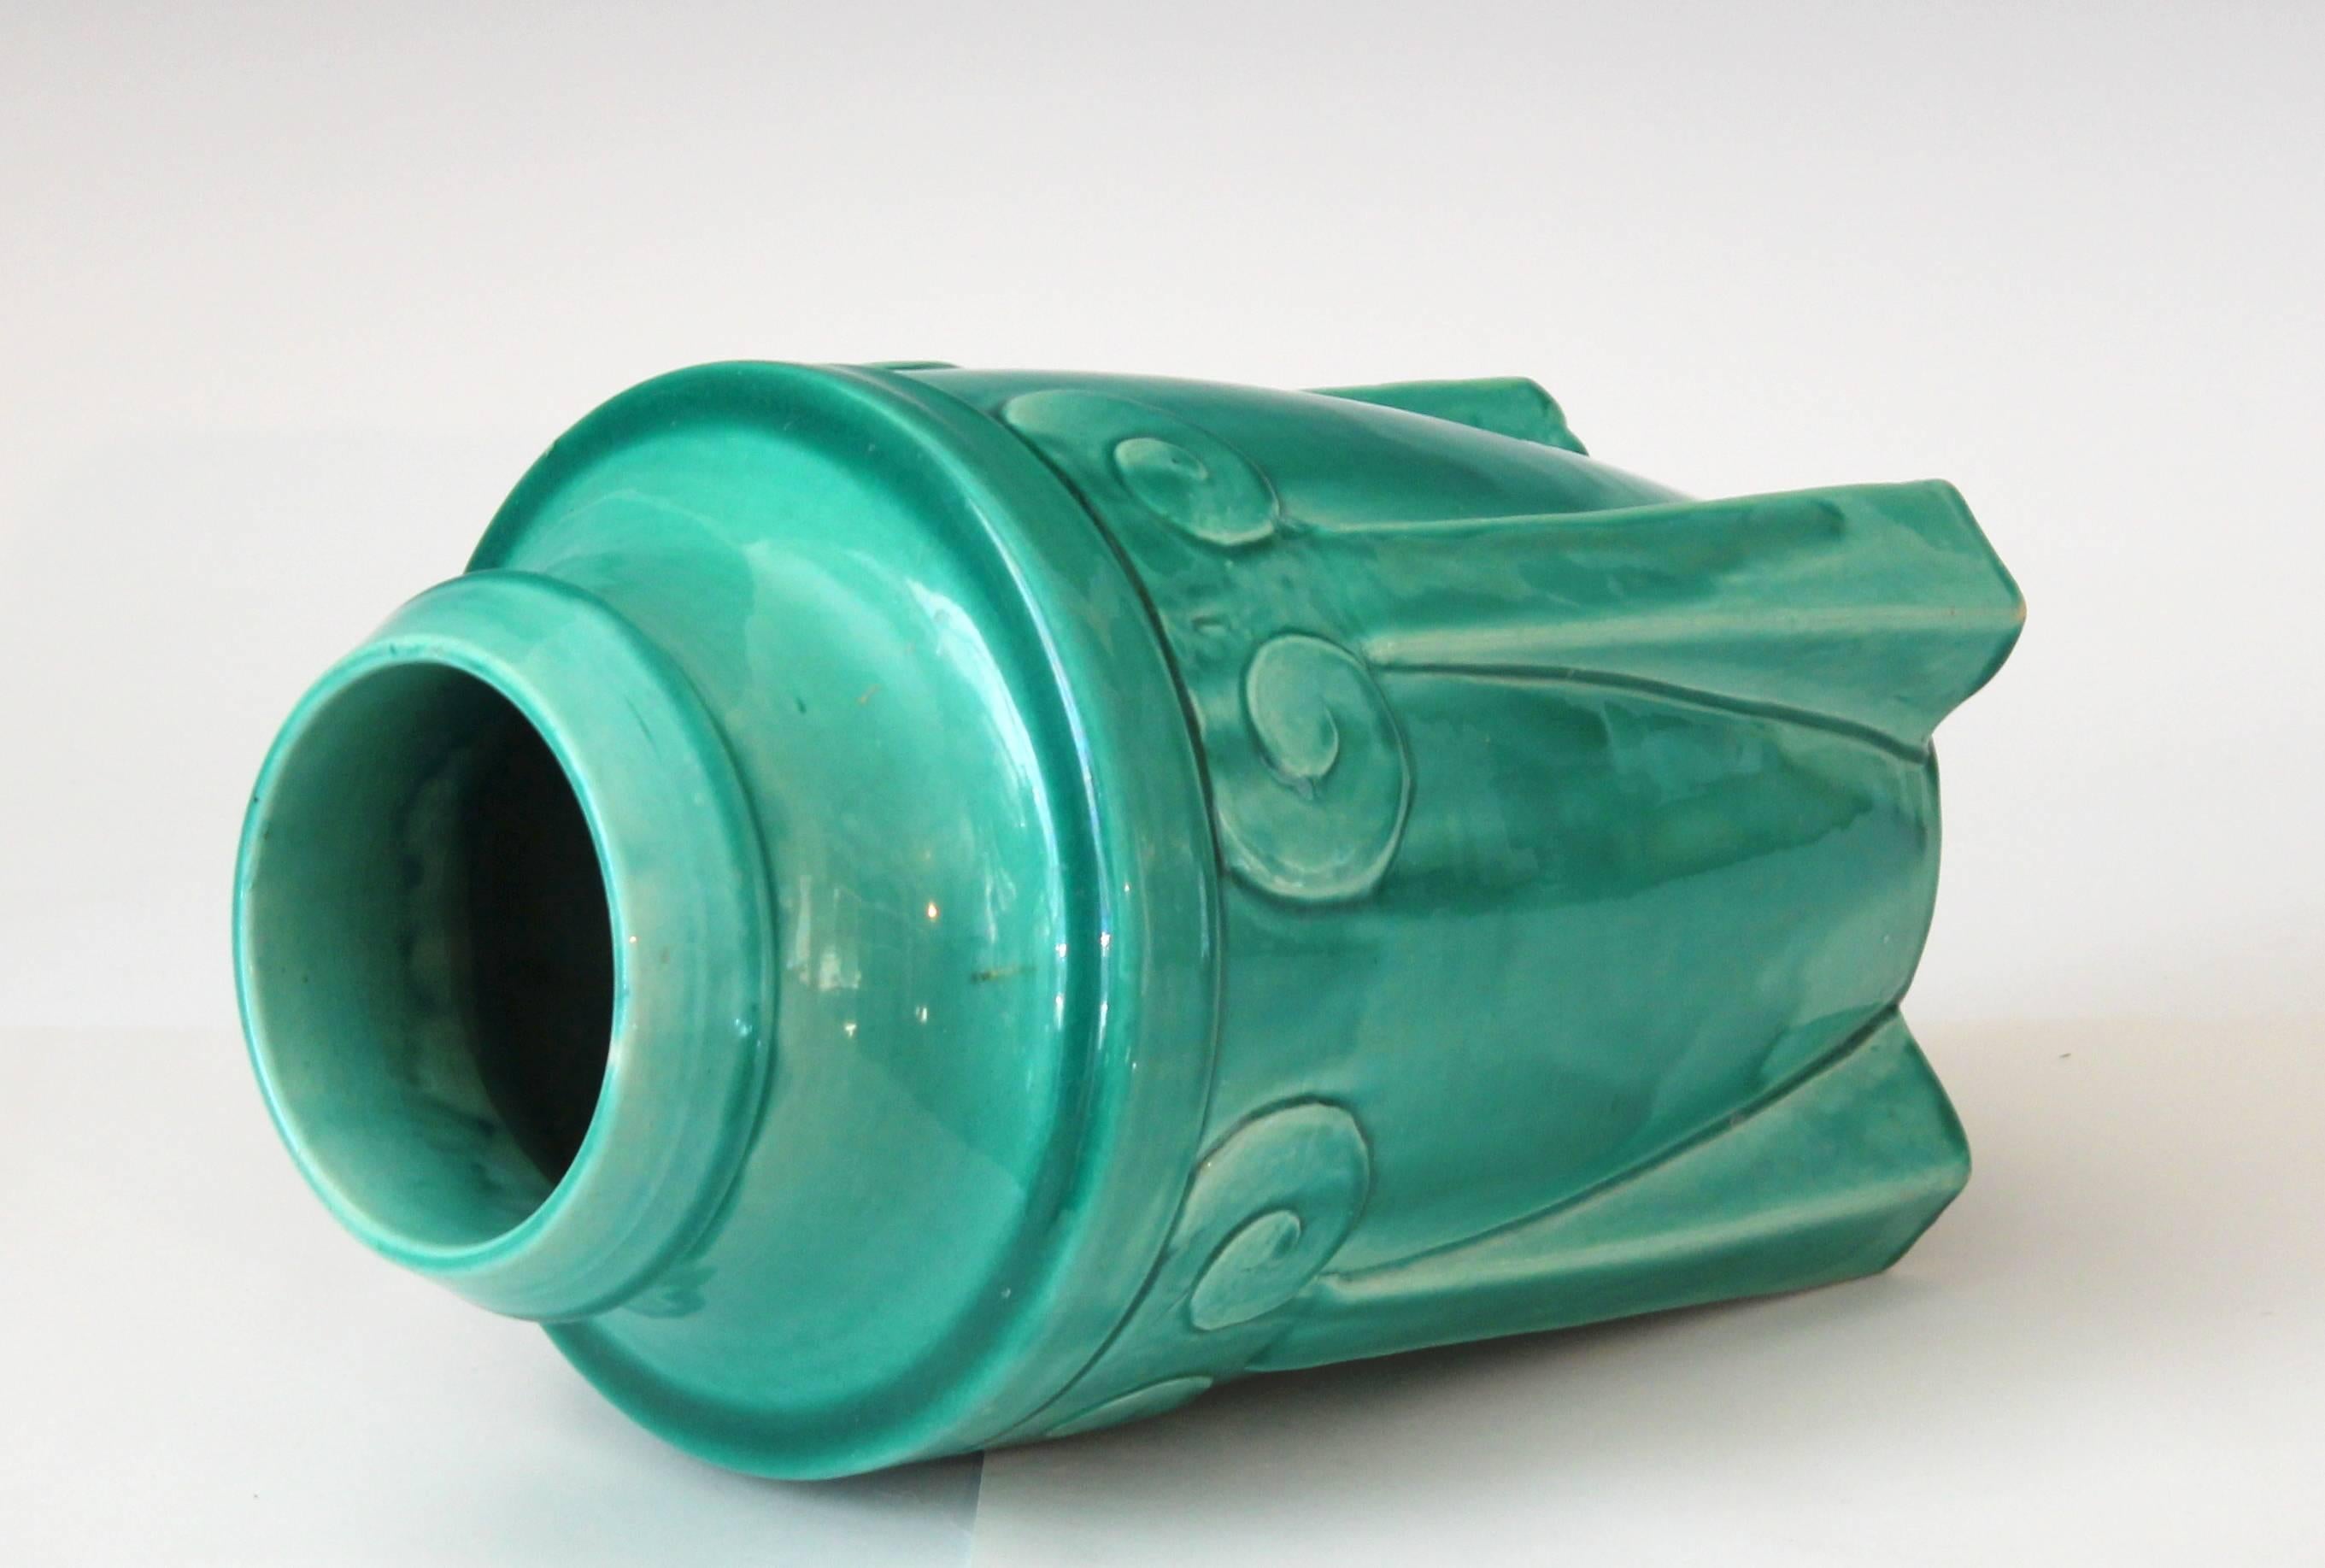 Awaji Pottery Japanese Art Deco Rocket Form Vase In Excellent Condition For Sale In Wilton, CT